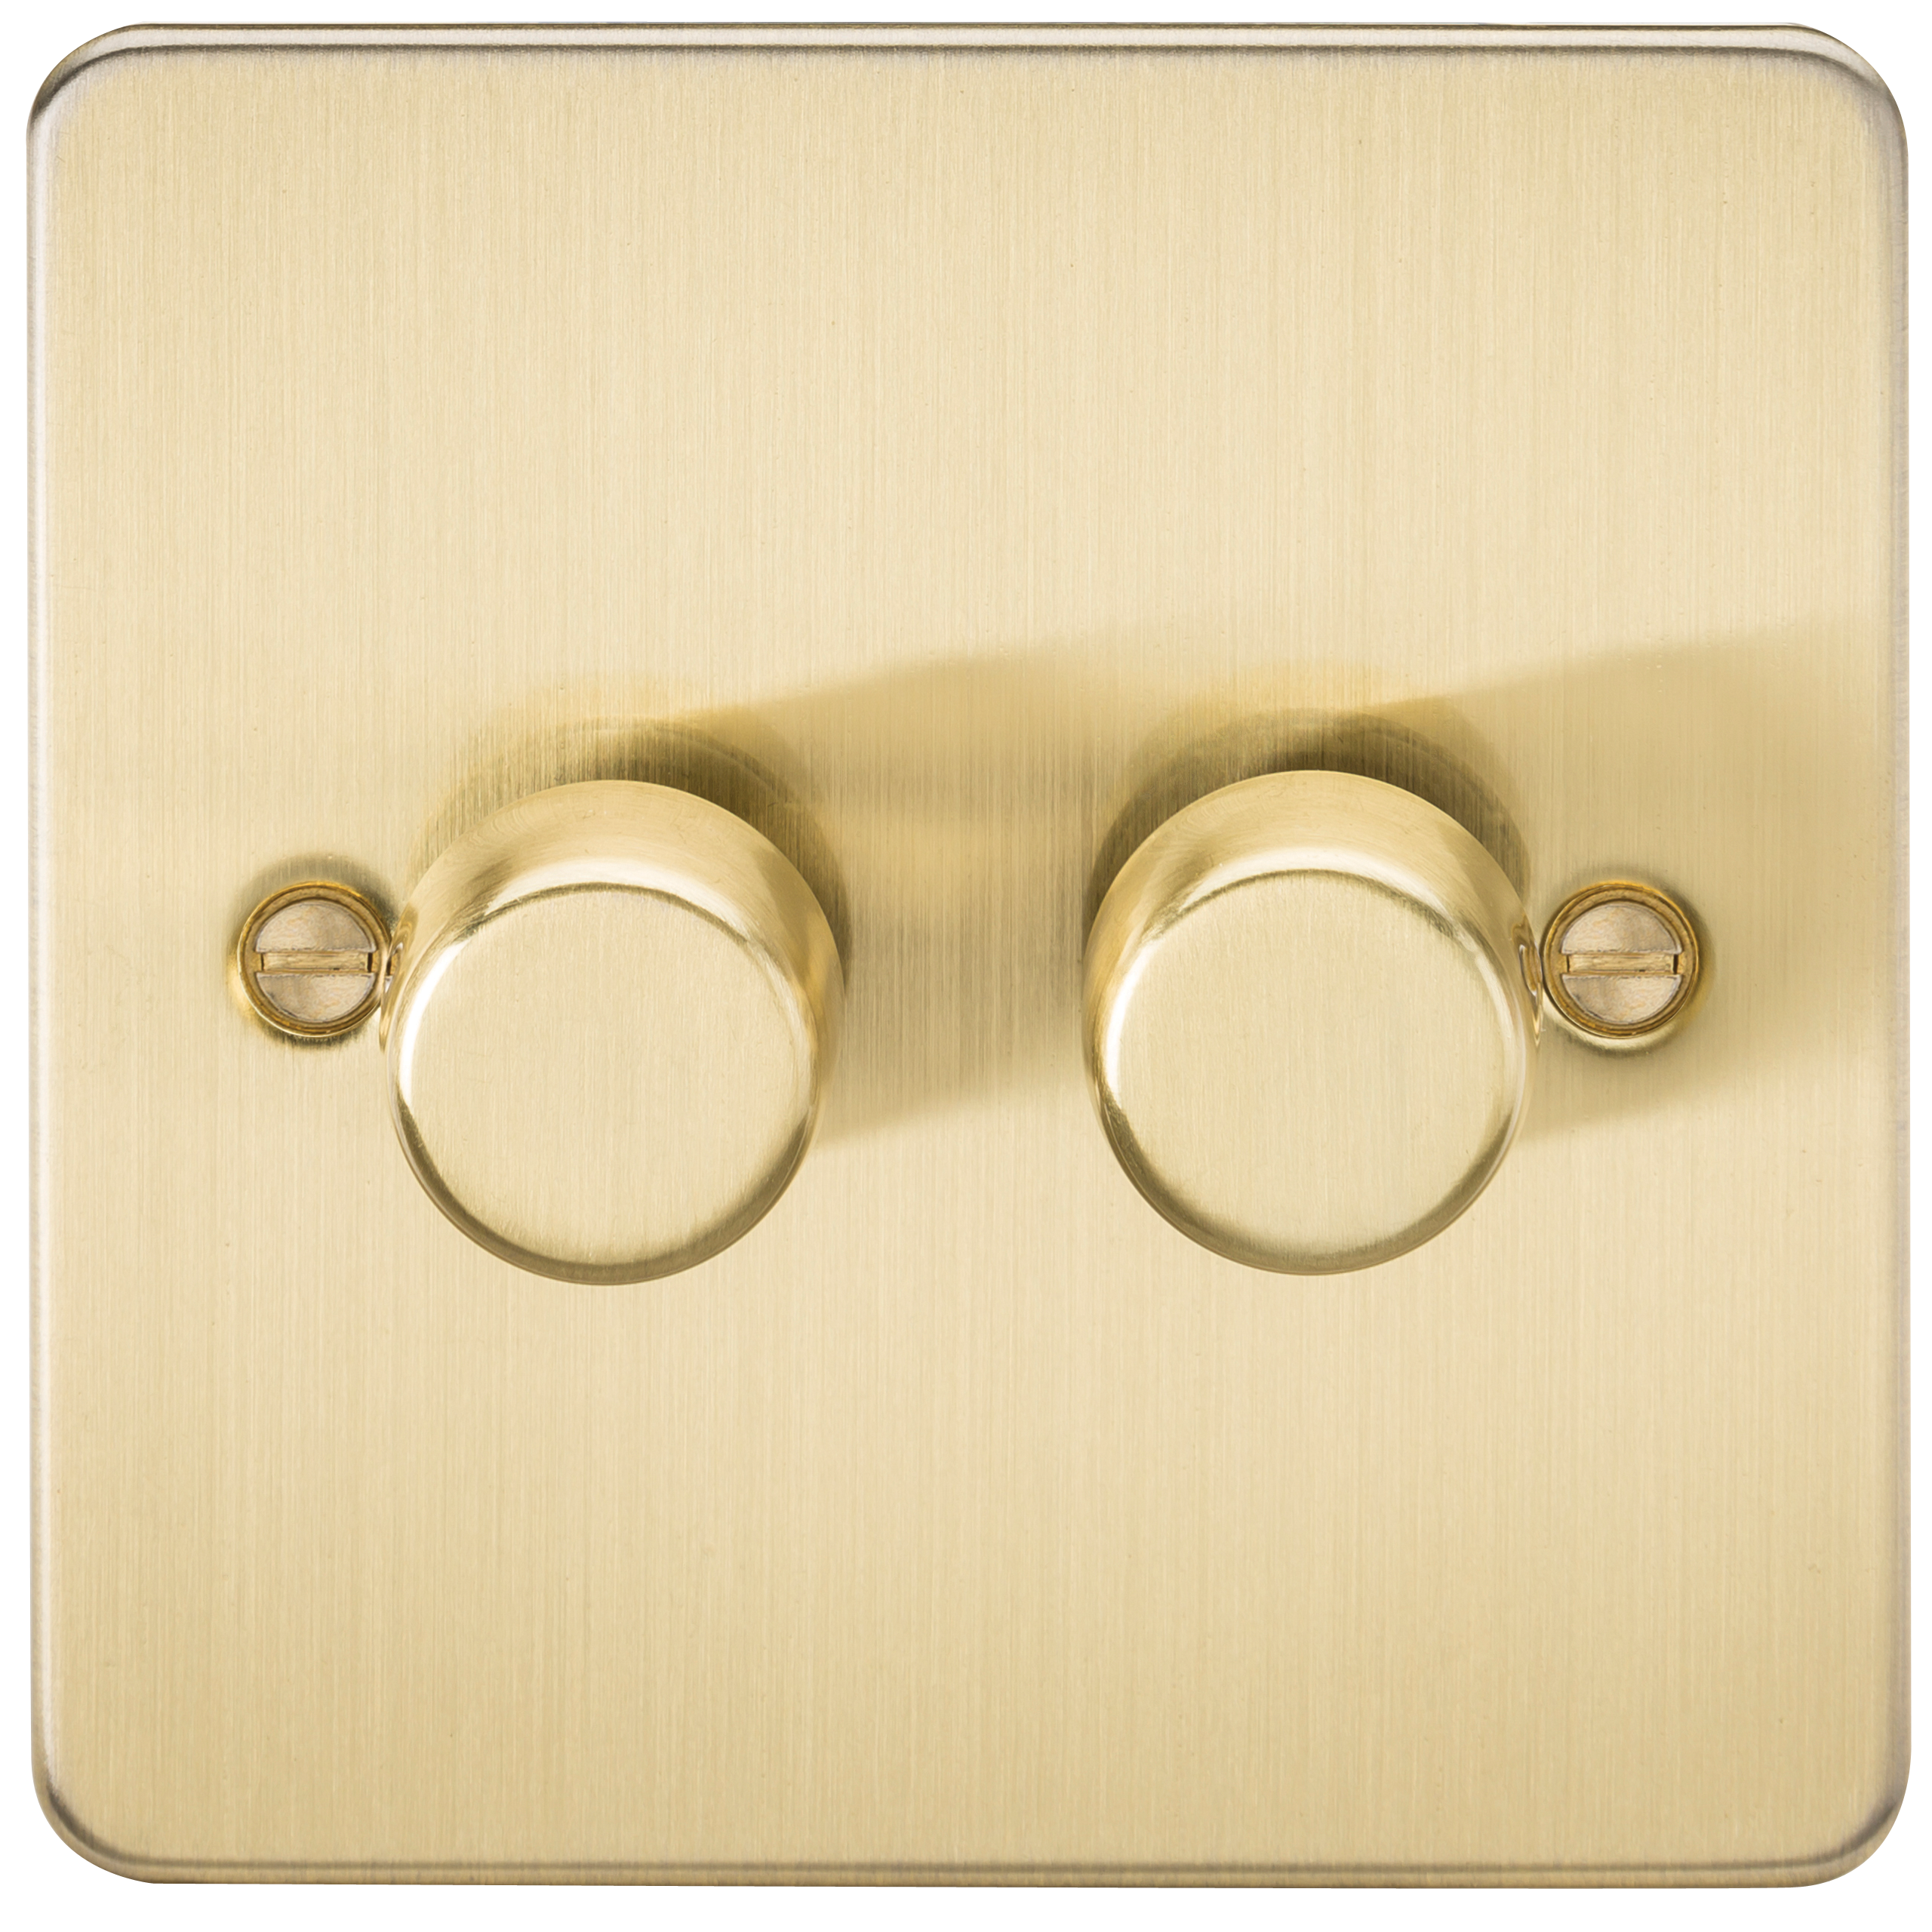 Flat Plate 2G 2 Way 10-200W Dimmer - Brushed Brass - FP2182BB 